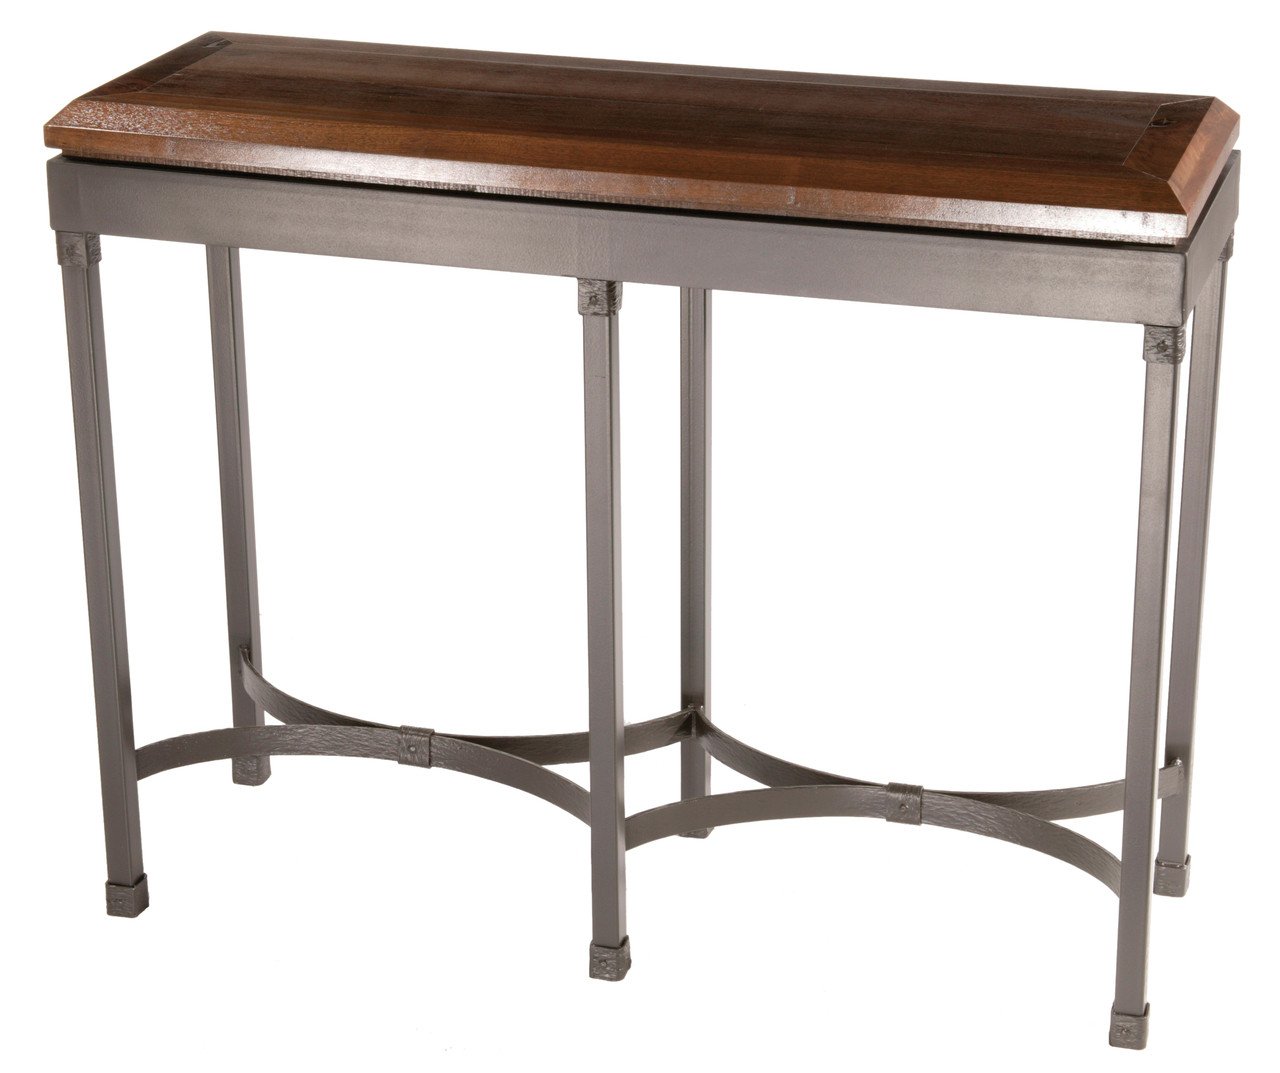 Stone County Ironworks 904-205-wal Cedarvale Console Table